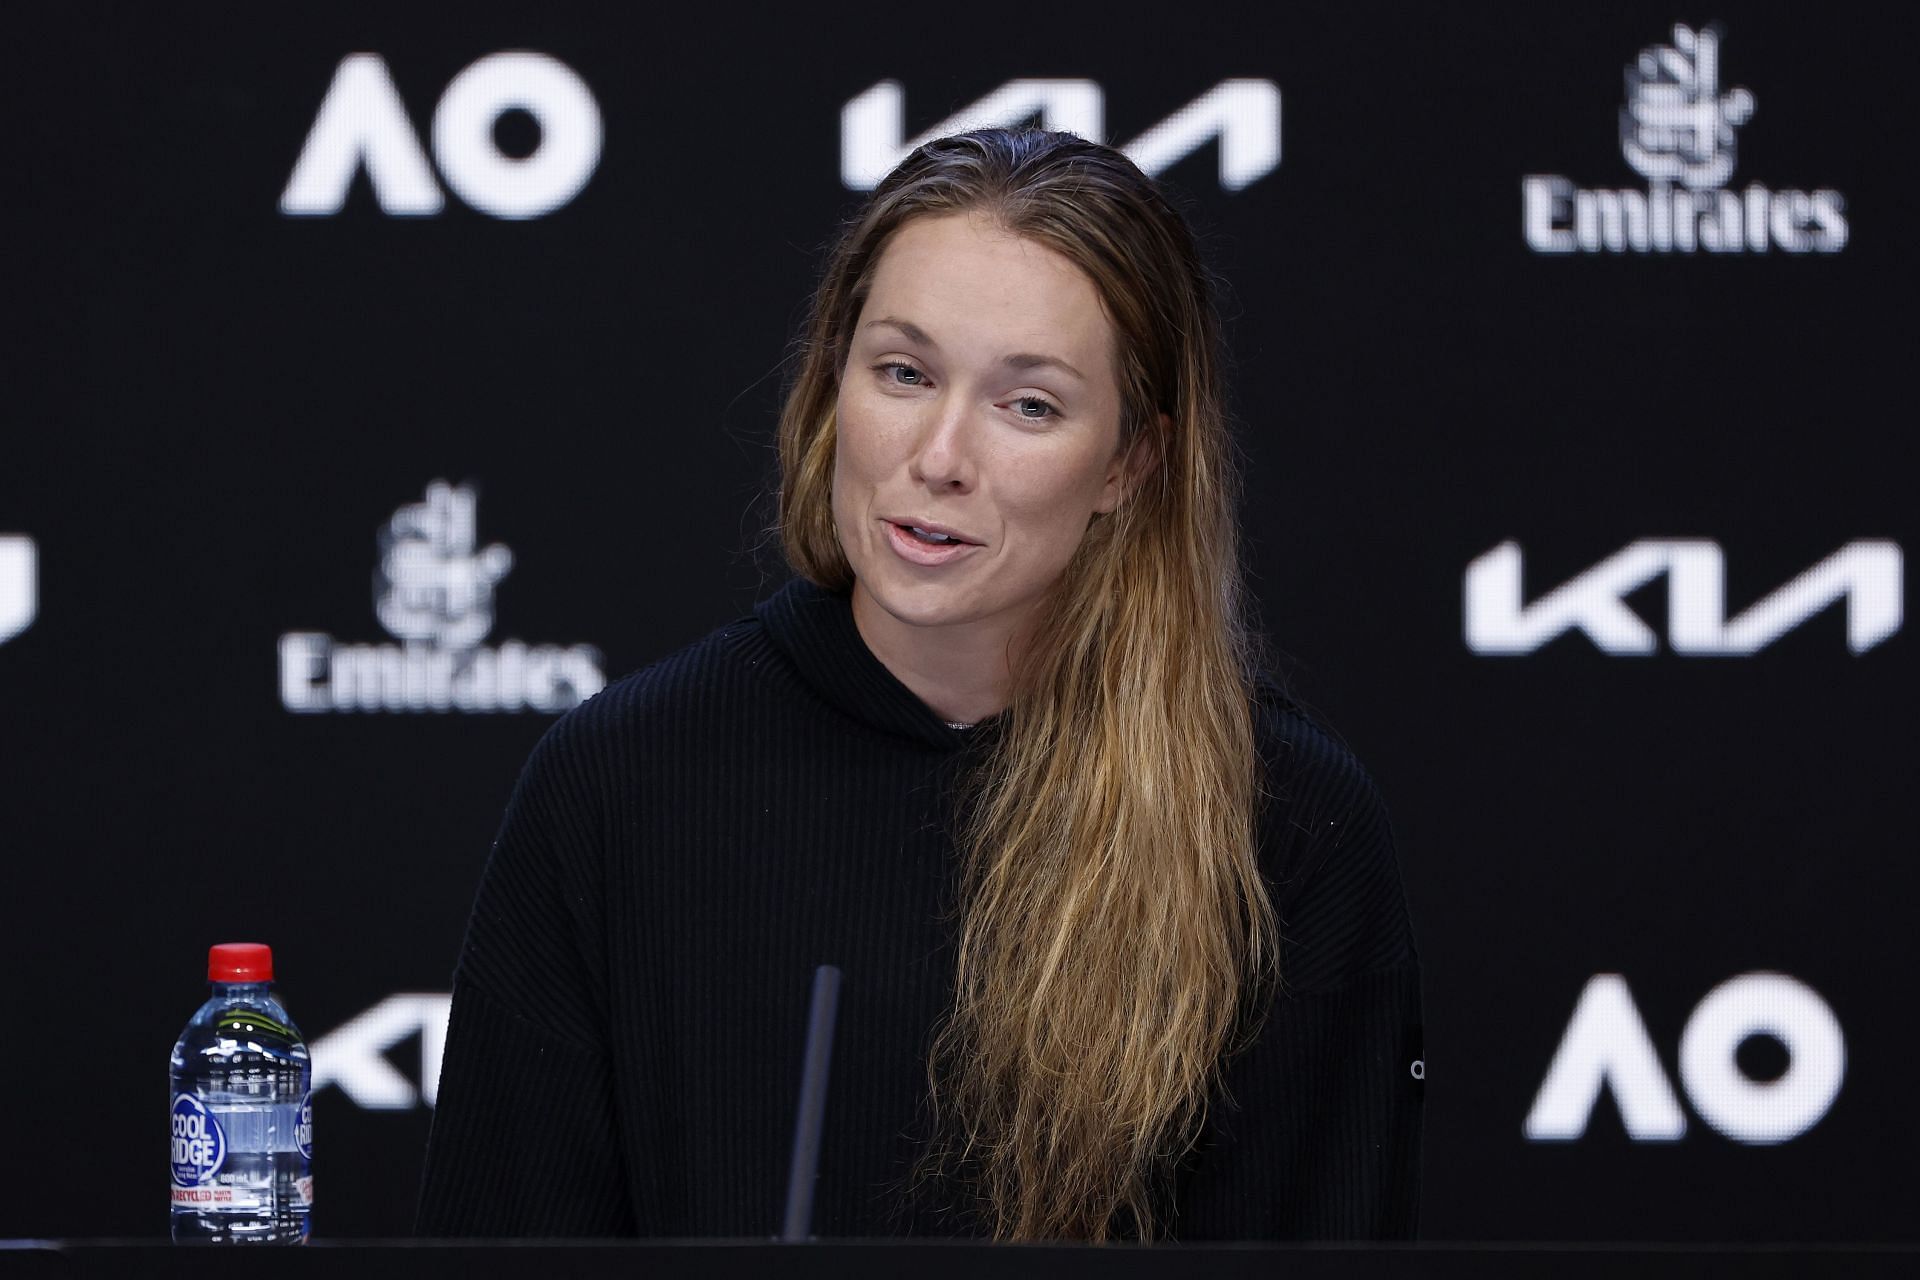 2022 Australian Open finalist Danielle Collins is currently without an apparel or shoe sponsor